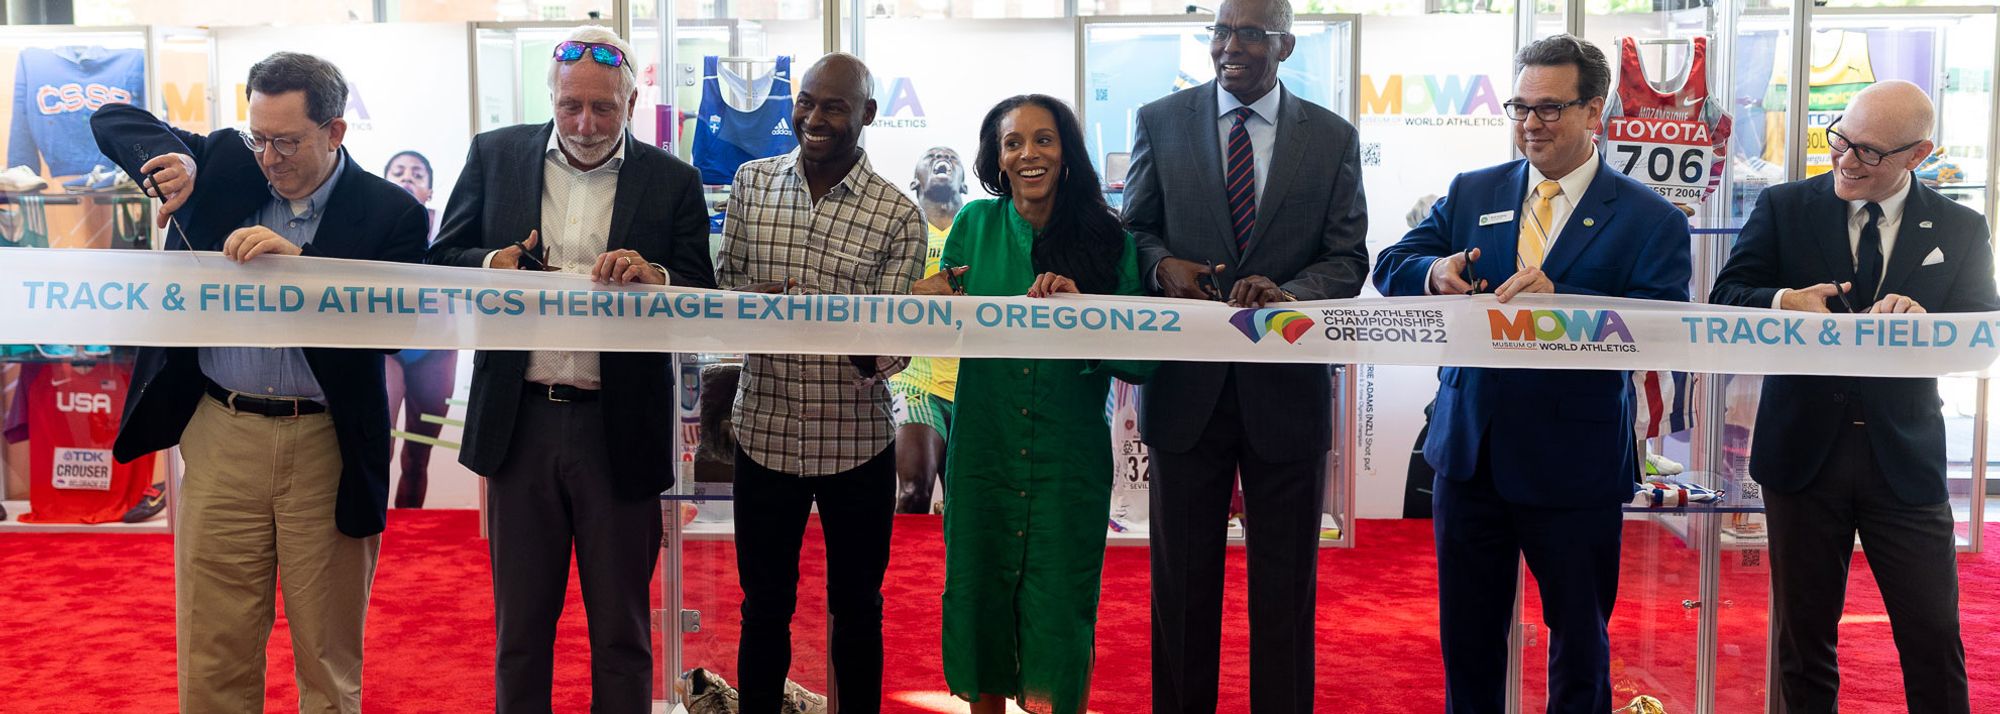 The MOWA Track & Field Heritage Exhibition Oregon22 has launched at the University of Oregon